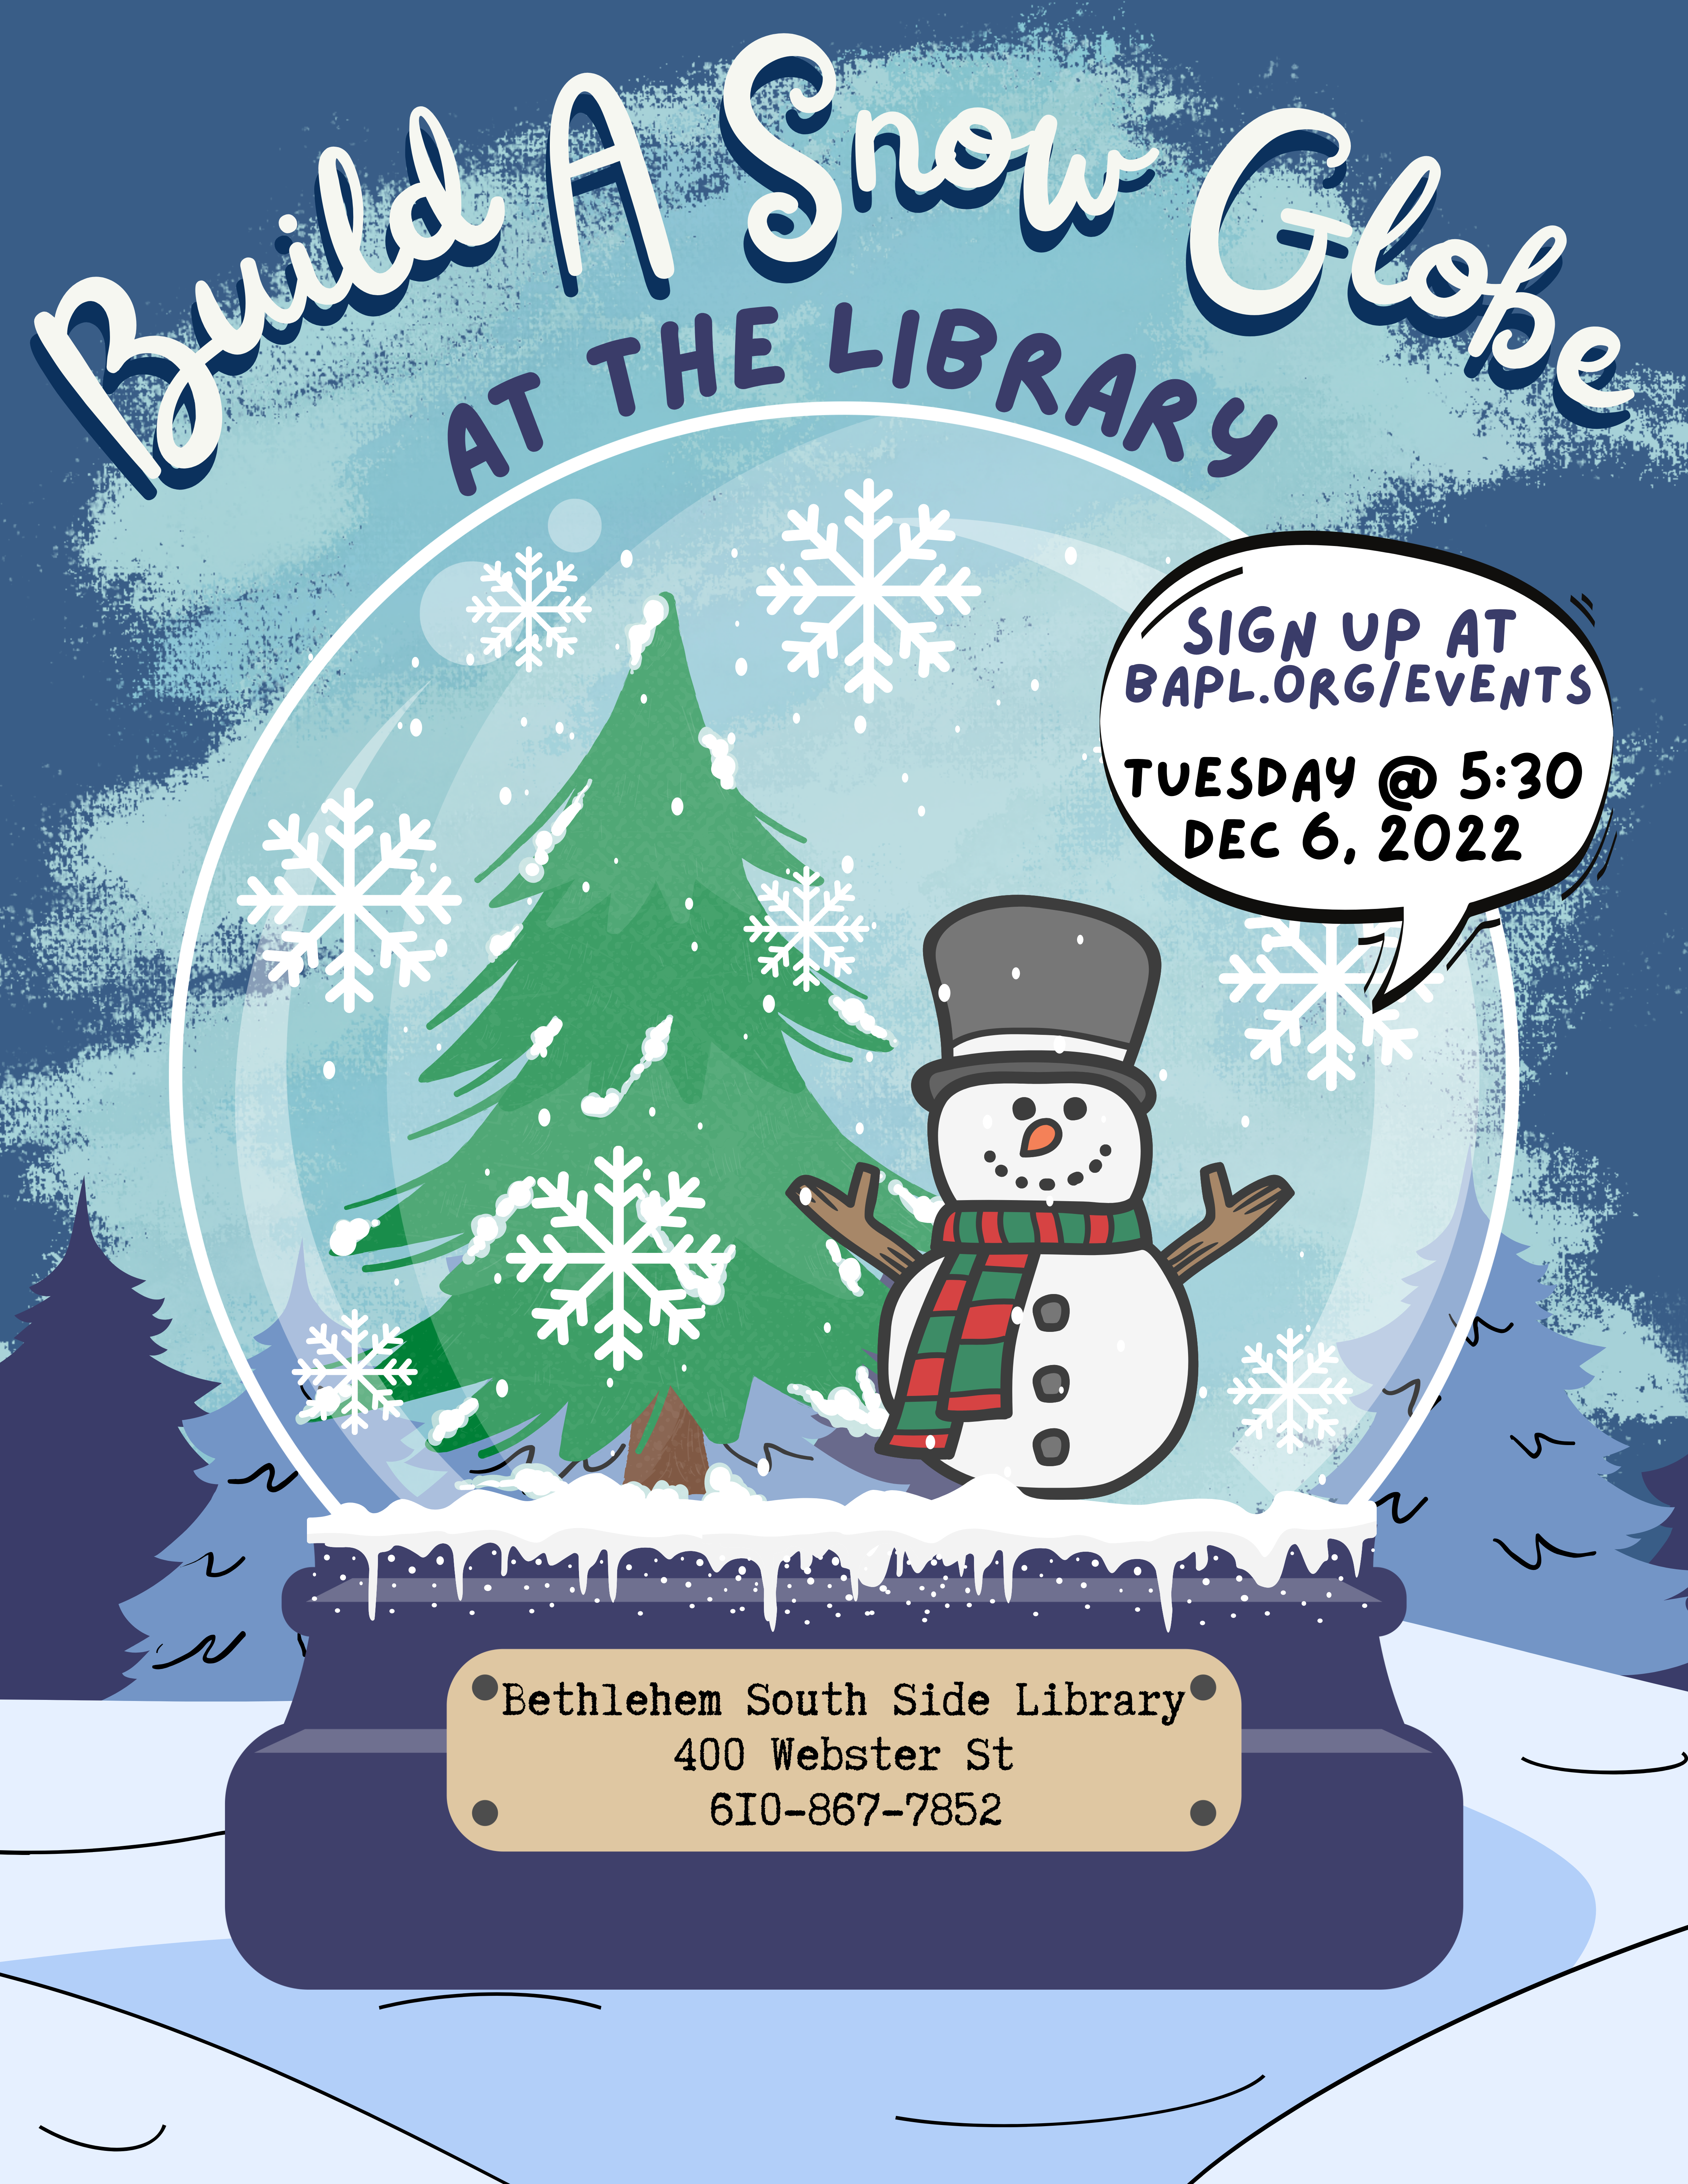 Build A Snow Globe at the Library - December 6, 2022 at 5:30pm